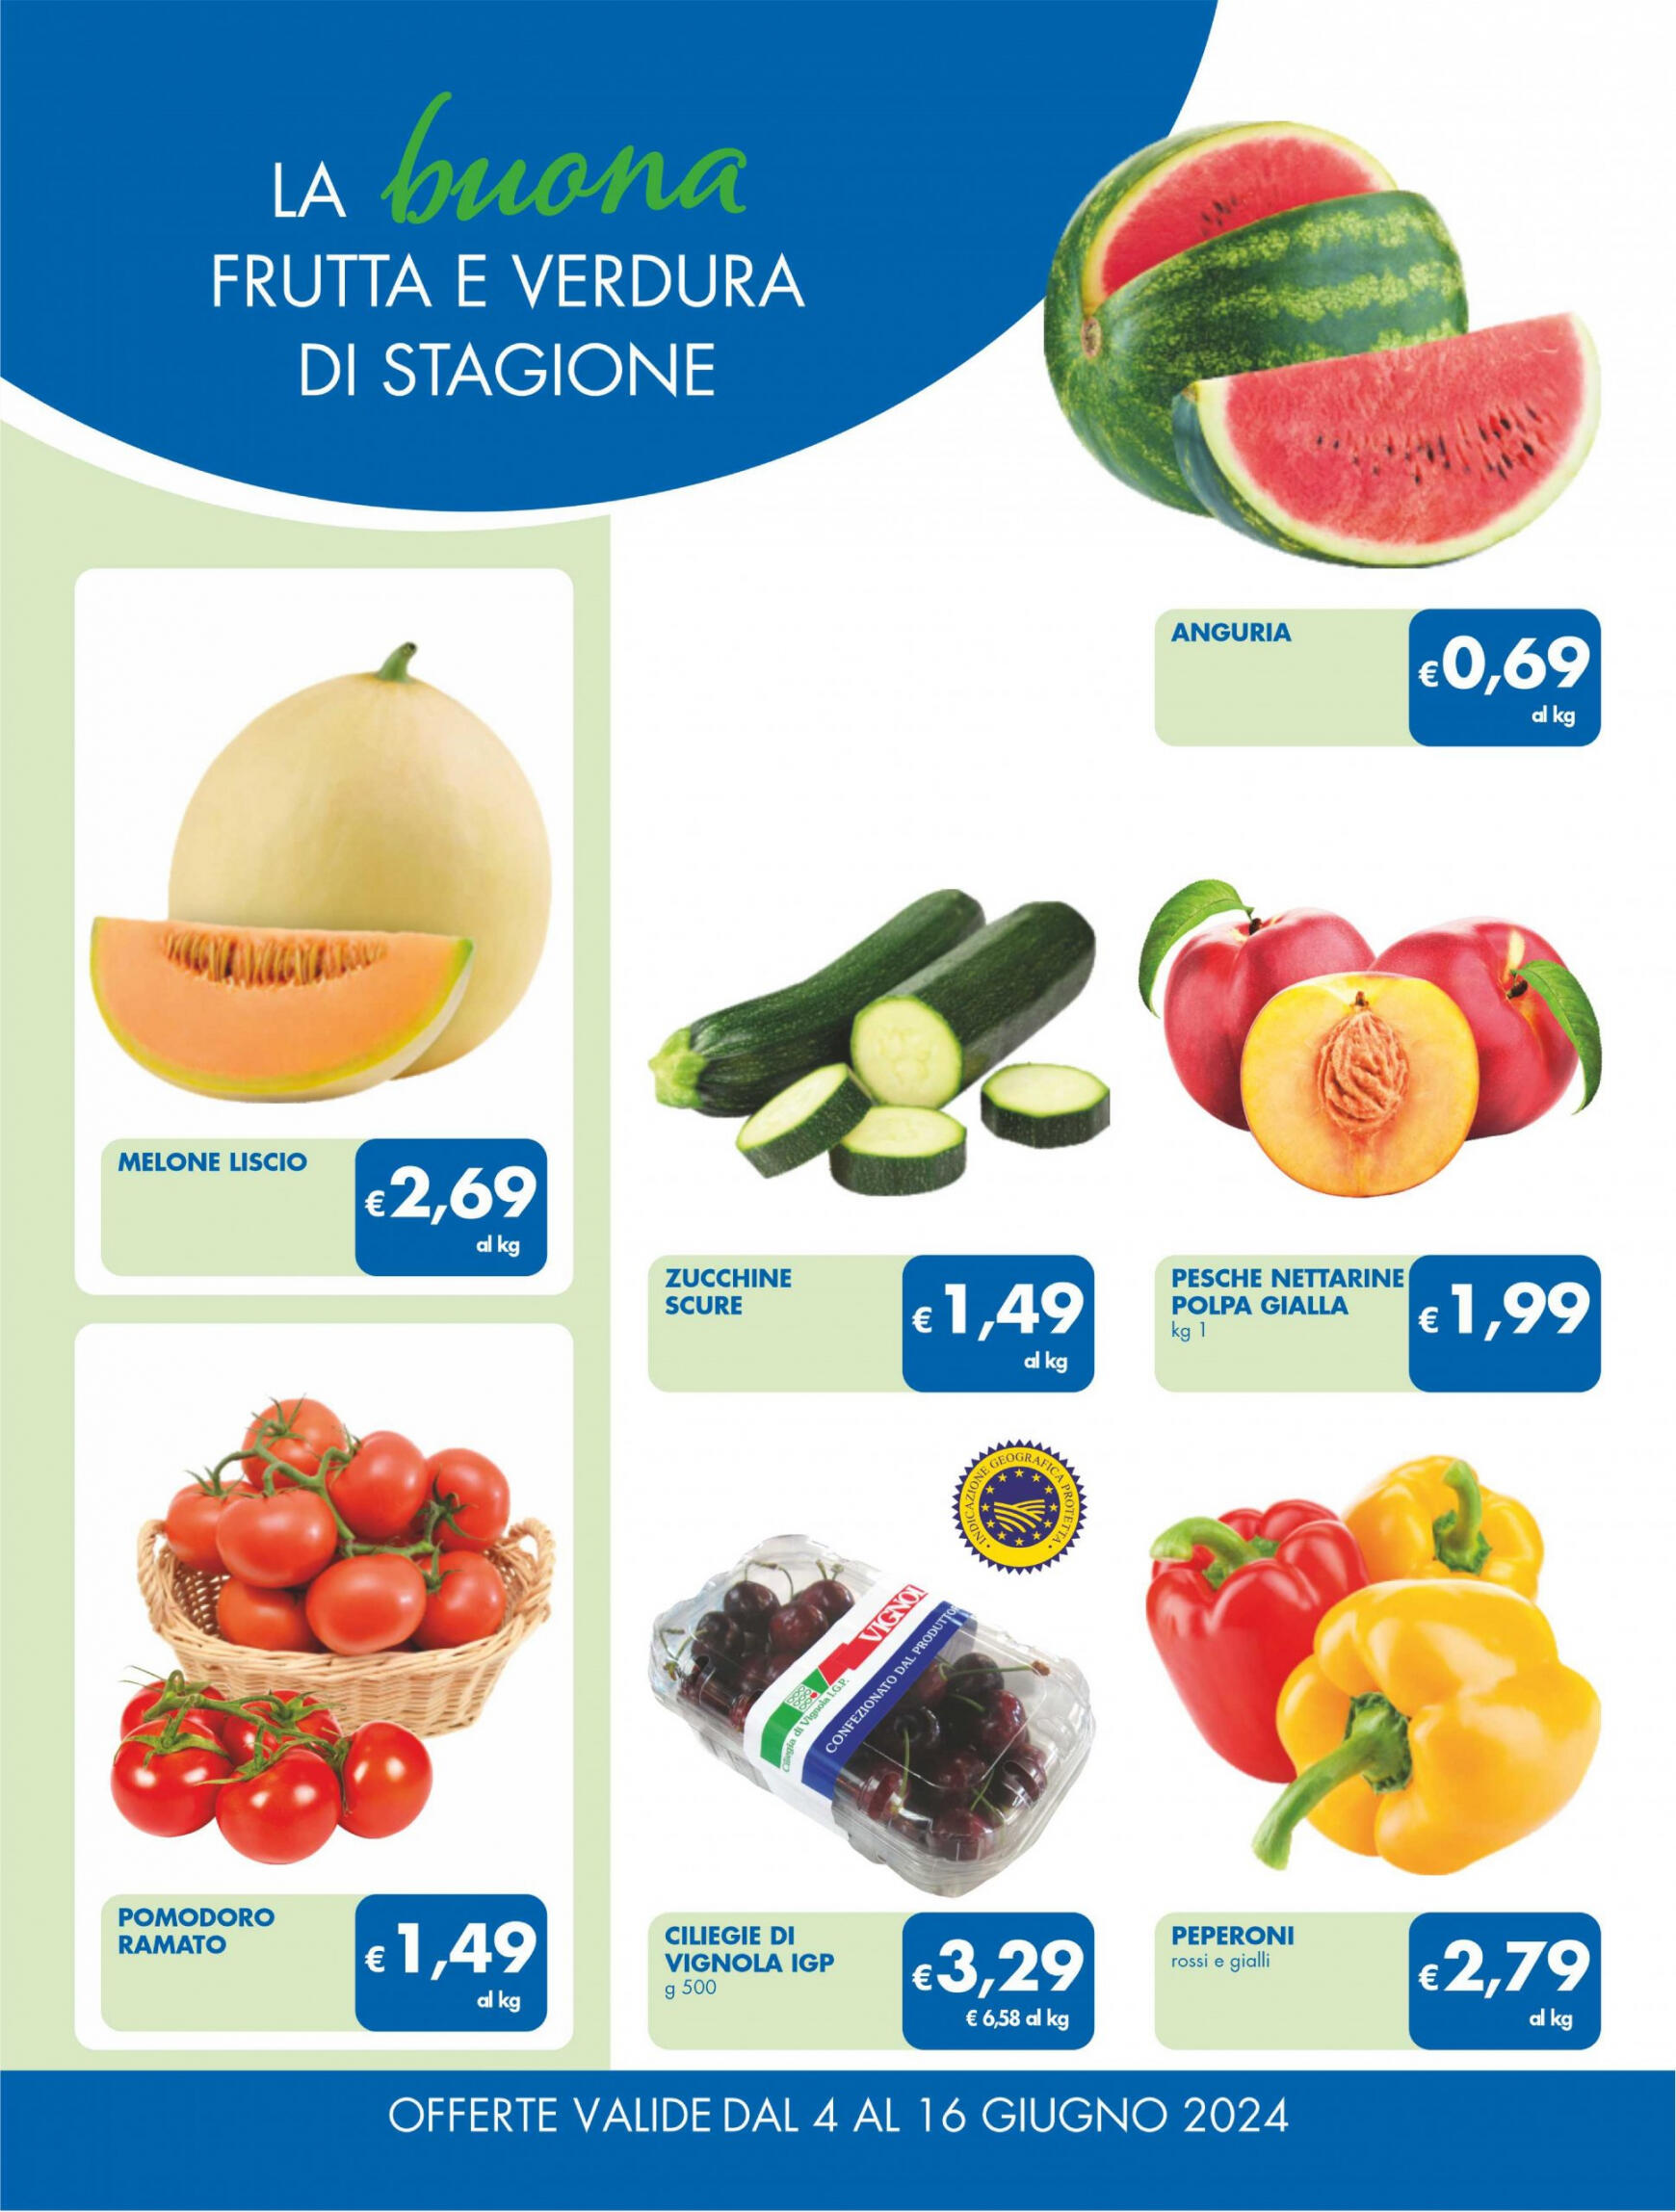 md-discount - Nuovo volantino MD 04.06. - 16.06. - page: 8